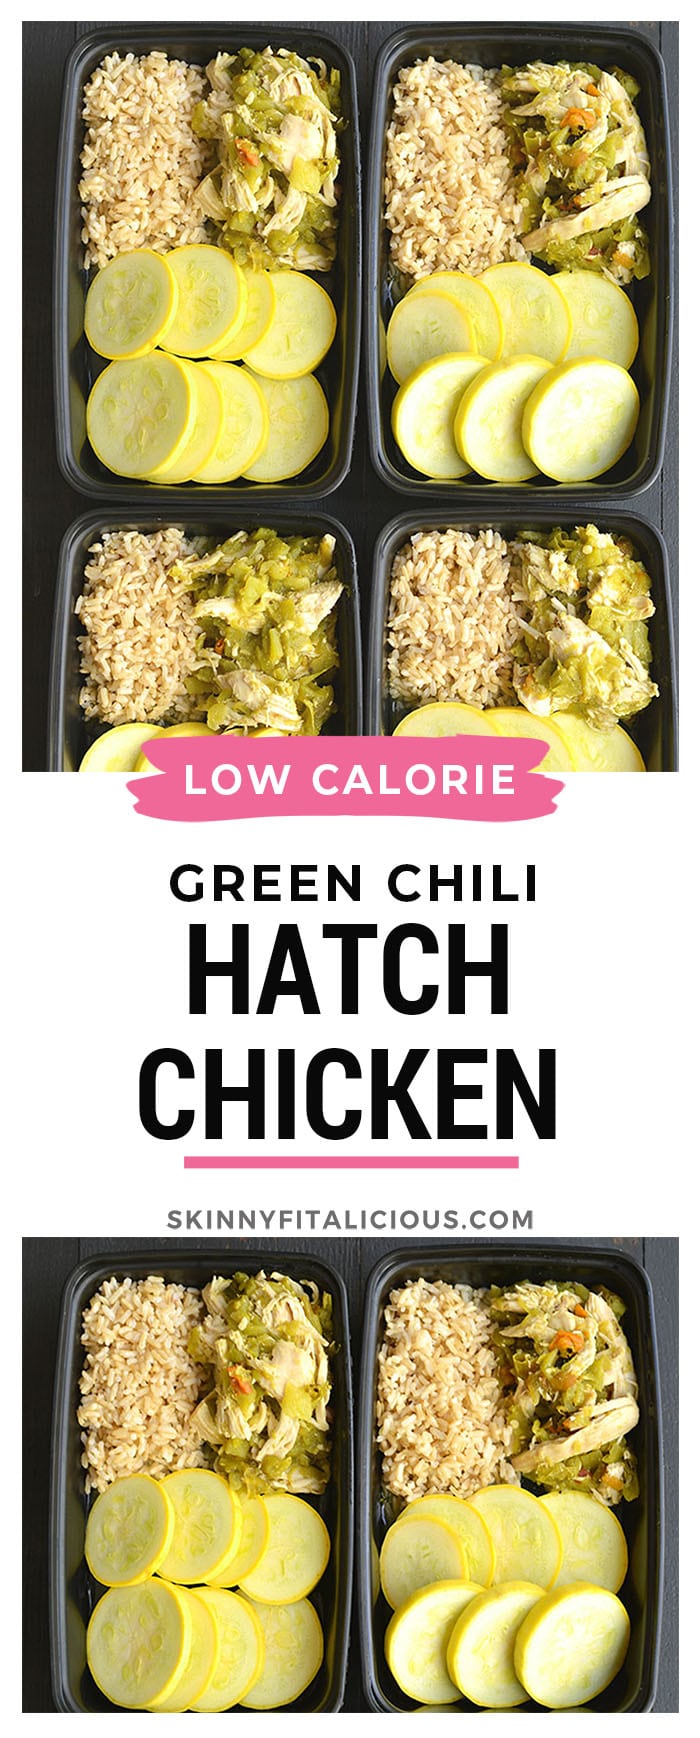 Meal Prep Hatch Green Chile Chicken! This simple dinner recipe is filled with spicy and smoky flavors. Serve over brown rice, lettuce or zucchini noodles for a lighter, healthier dish! Gluten Free + Low Calorie + Paleo option